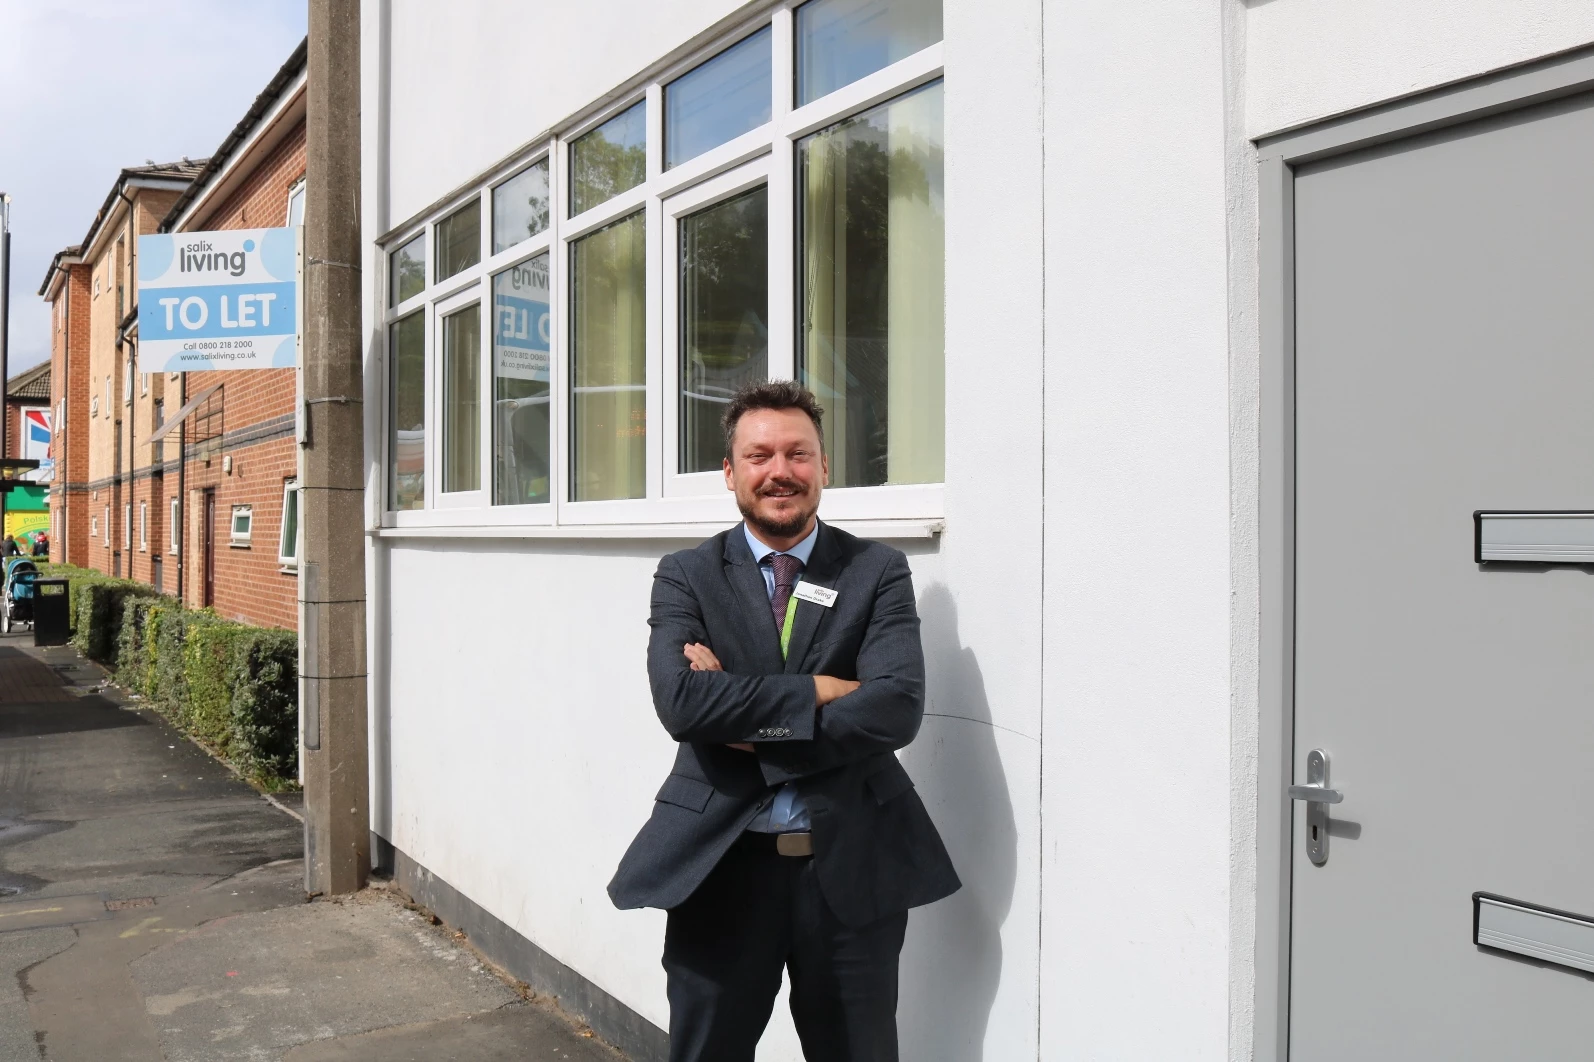 Jonathan Drake, service director at Salix Living, which has been recognised for its efforts to tackle homelessness.